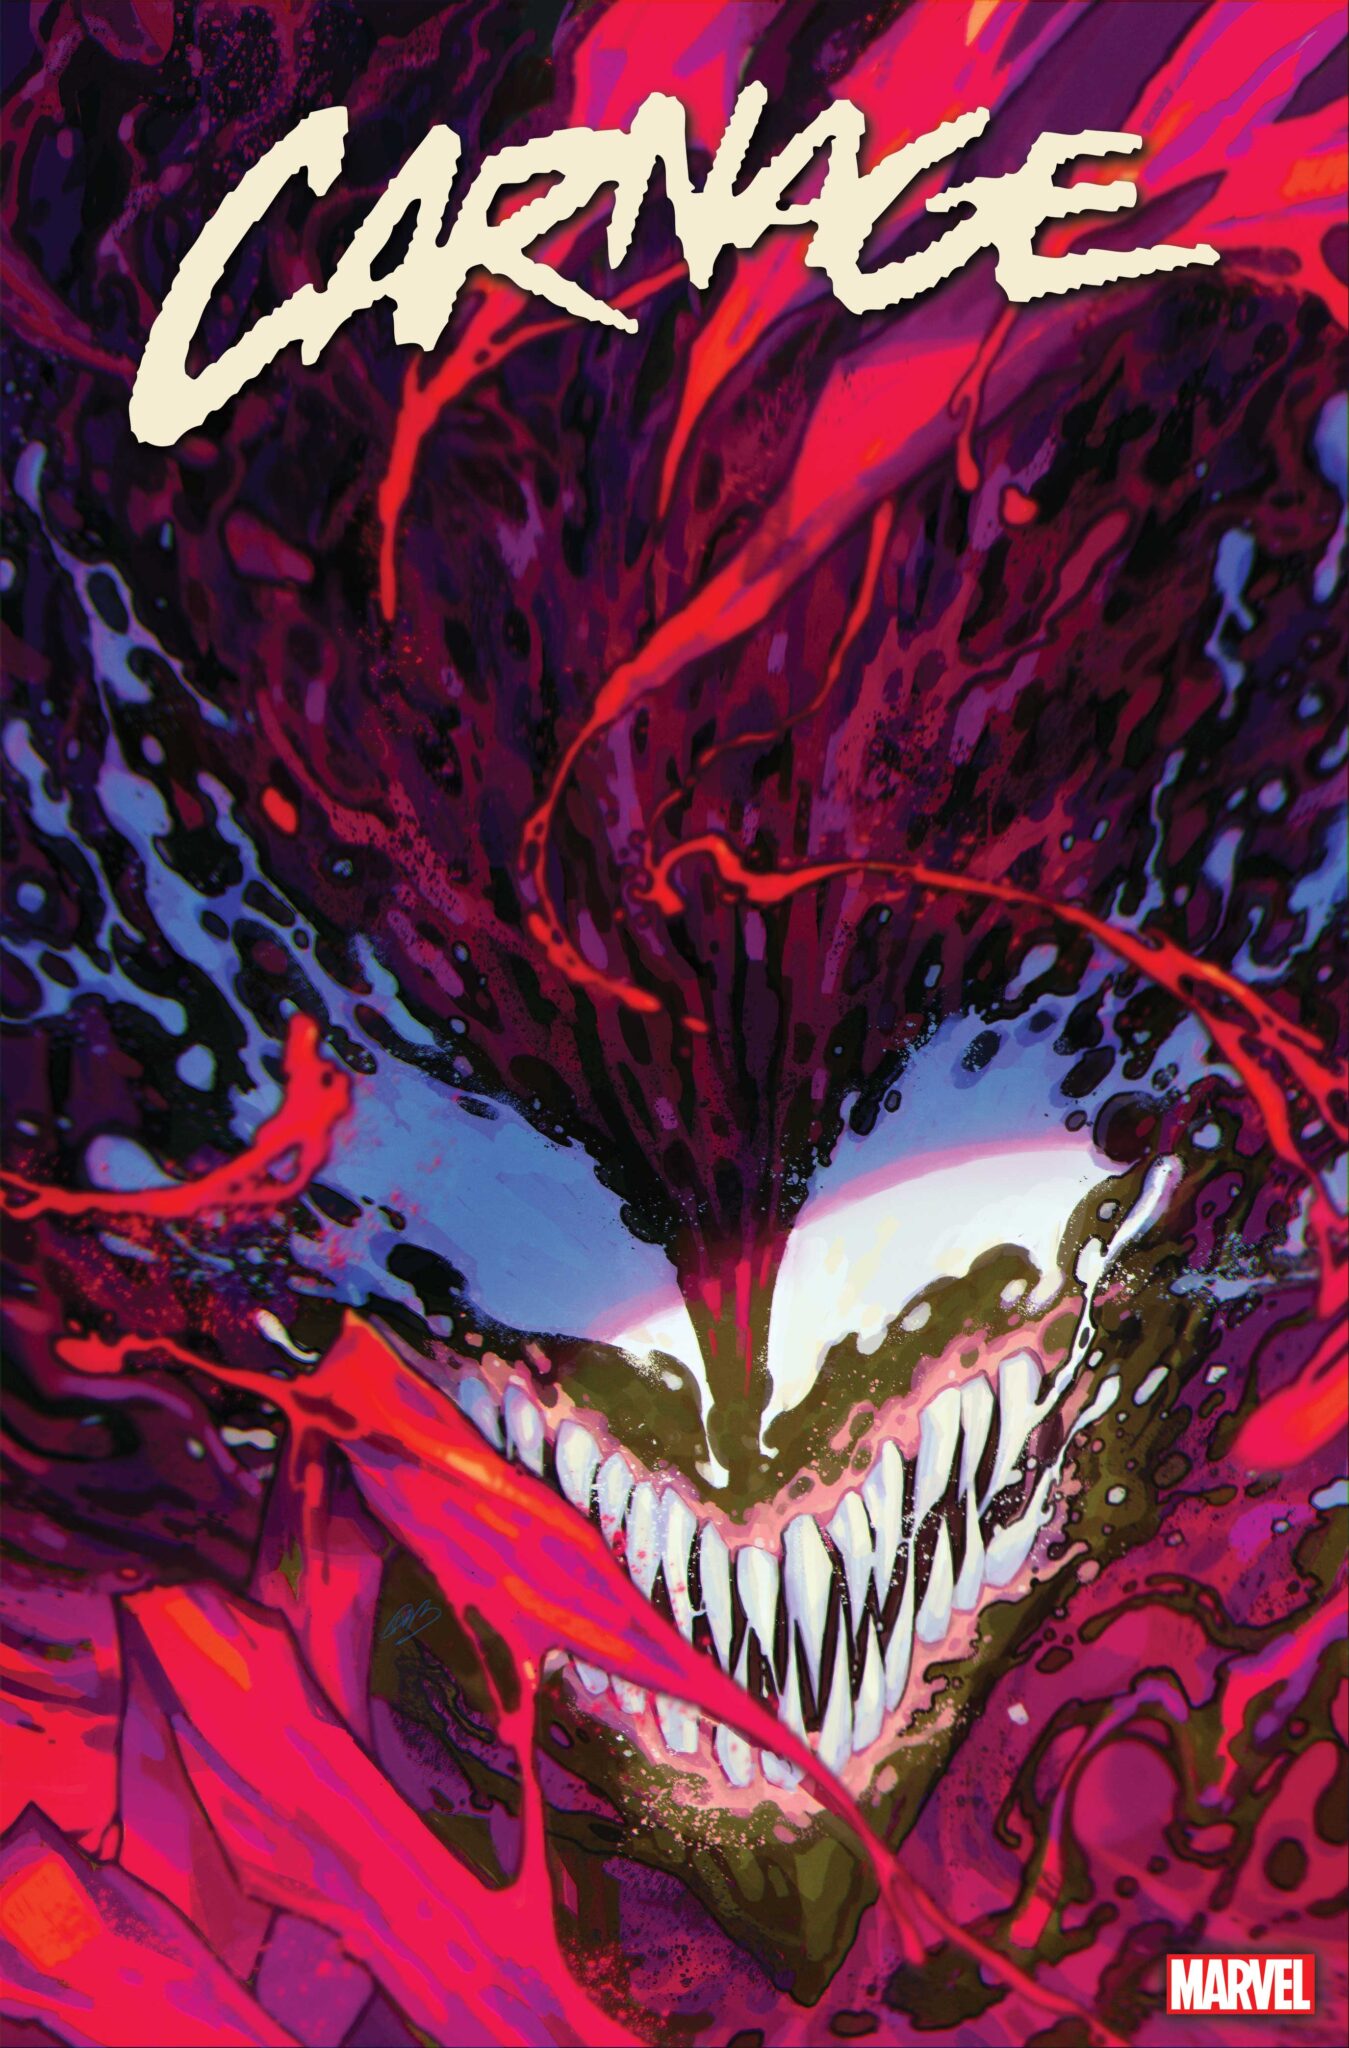 Carnage #1 cover